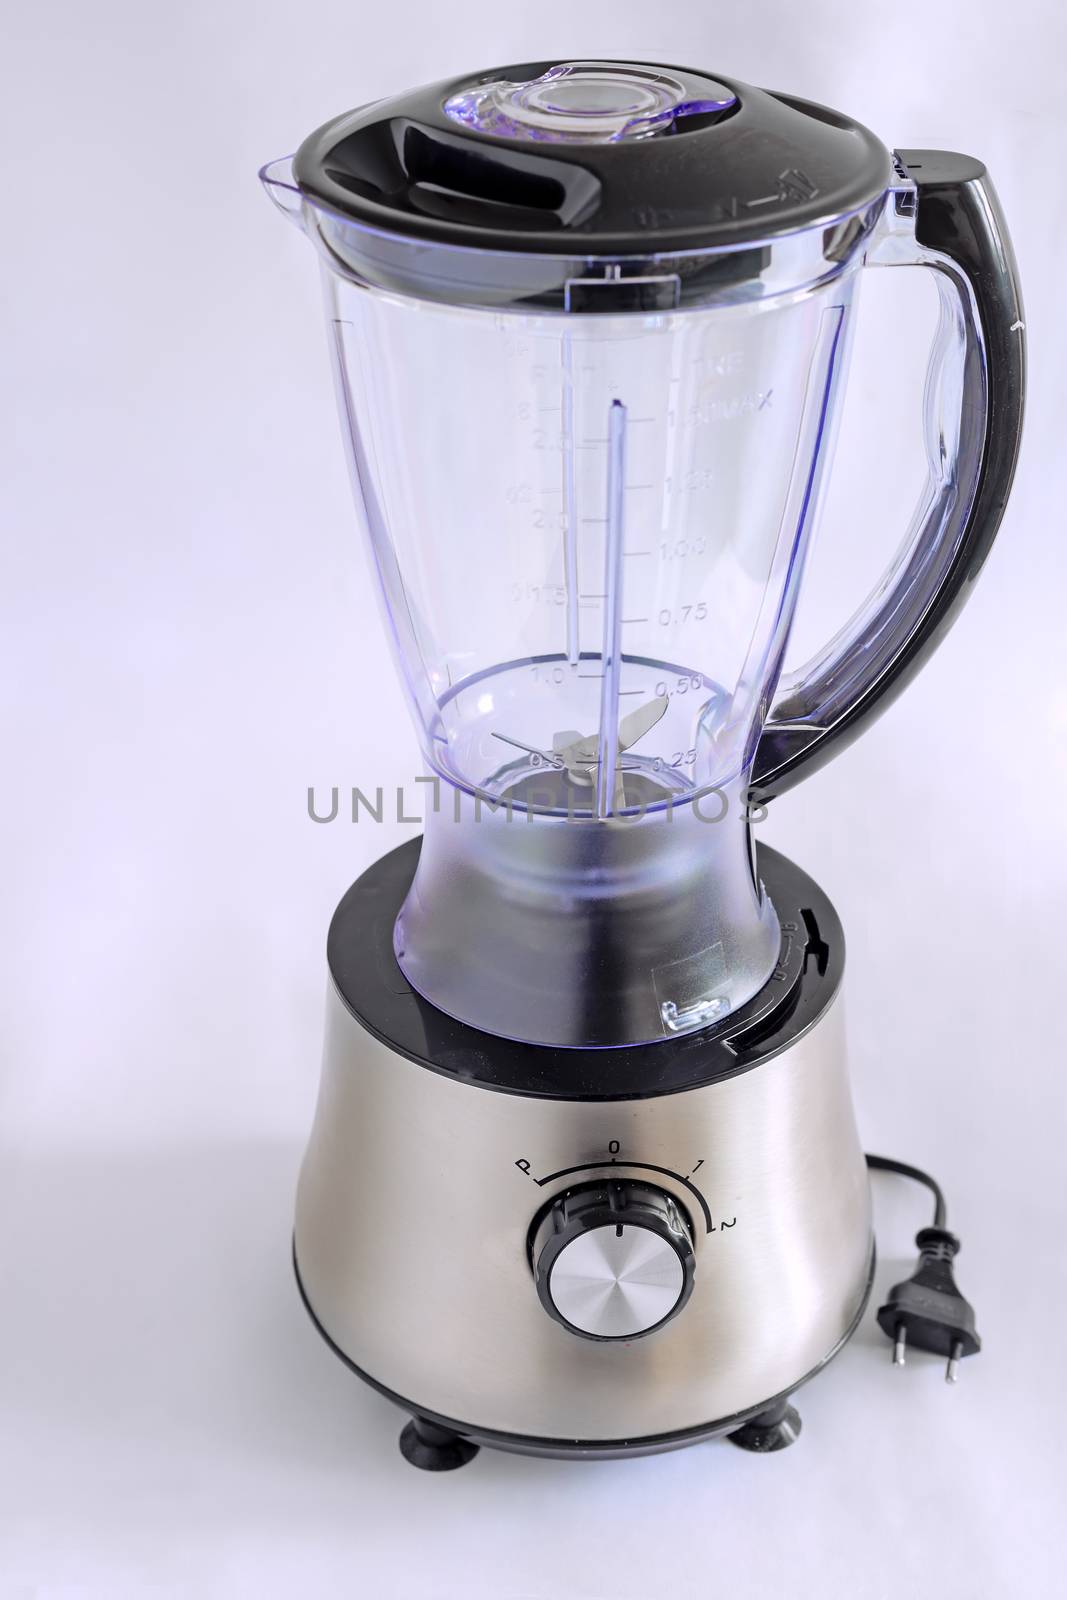 Home appliances: convenient blender for mixing cocktails, drinks, smoothies.